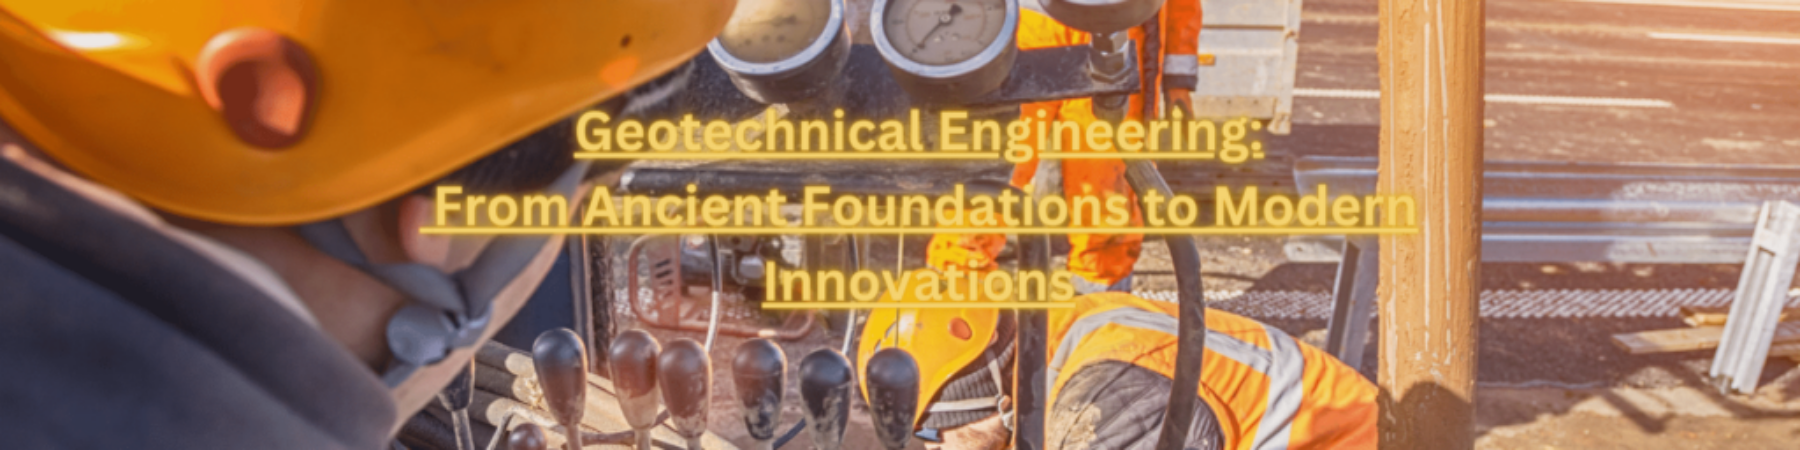 Geotechnical Engineering_ From Ancient Foundations to Modern Innovations